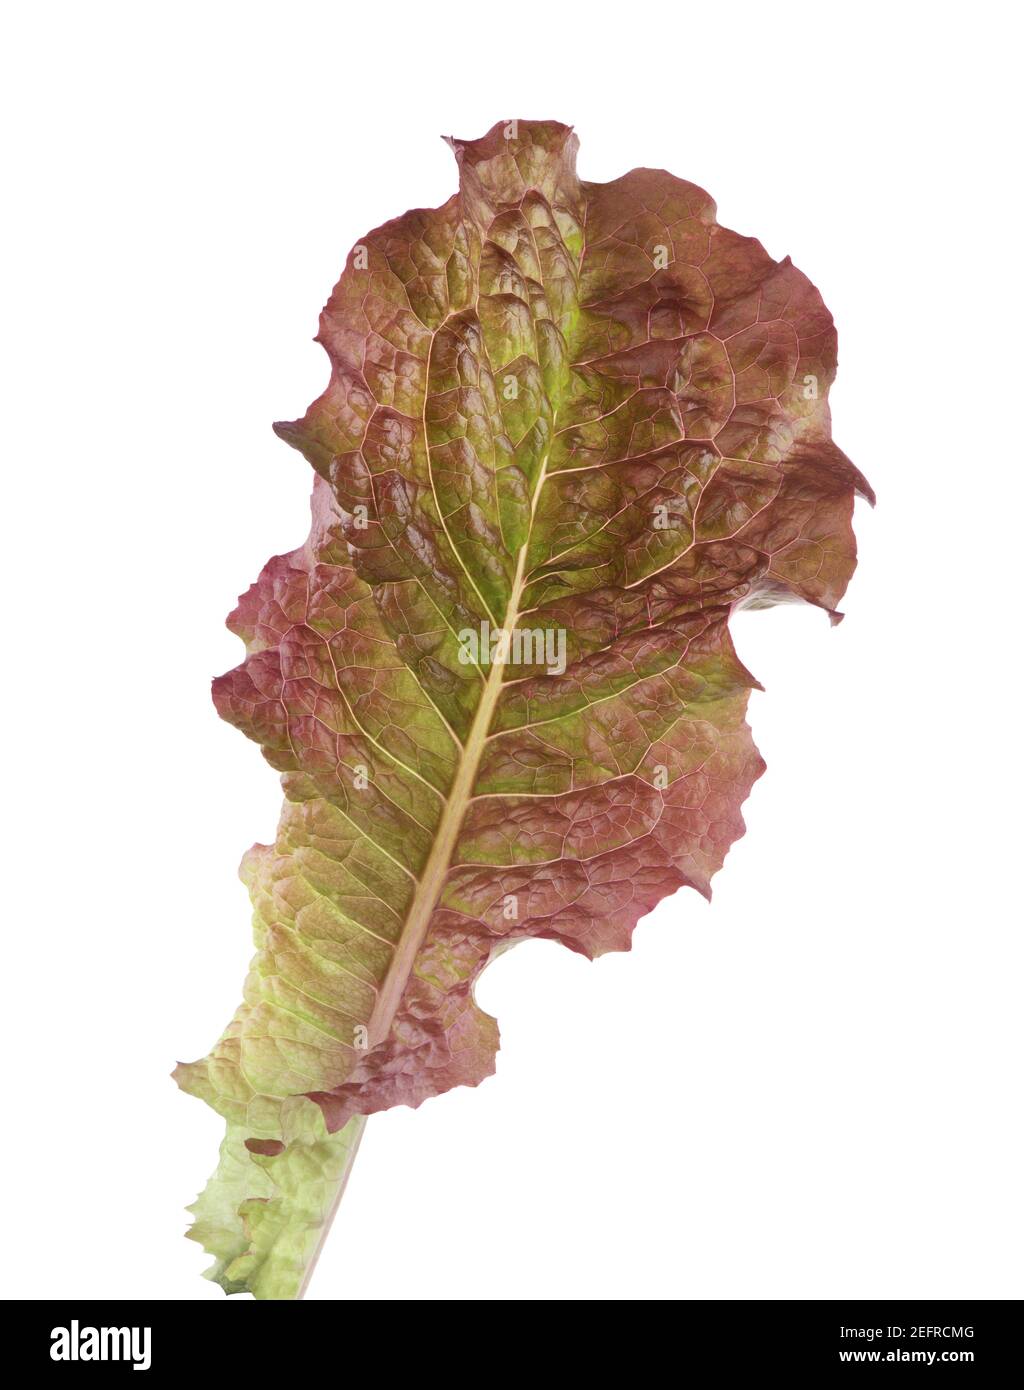 Red flame lettuce, closeup of a large leaf of an organically grown Lactuca sativa, Flame Red or Red Fire non-GMO variety. Isolated on white studio bac Stock Photo